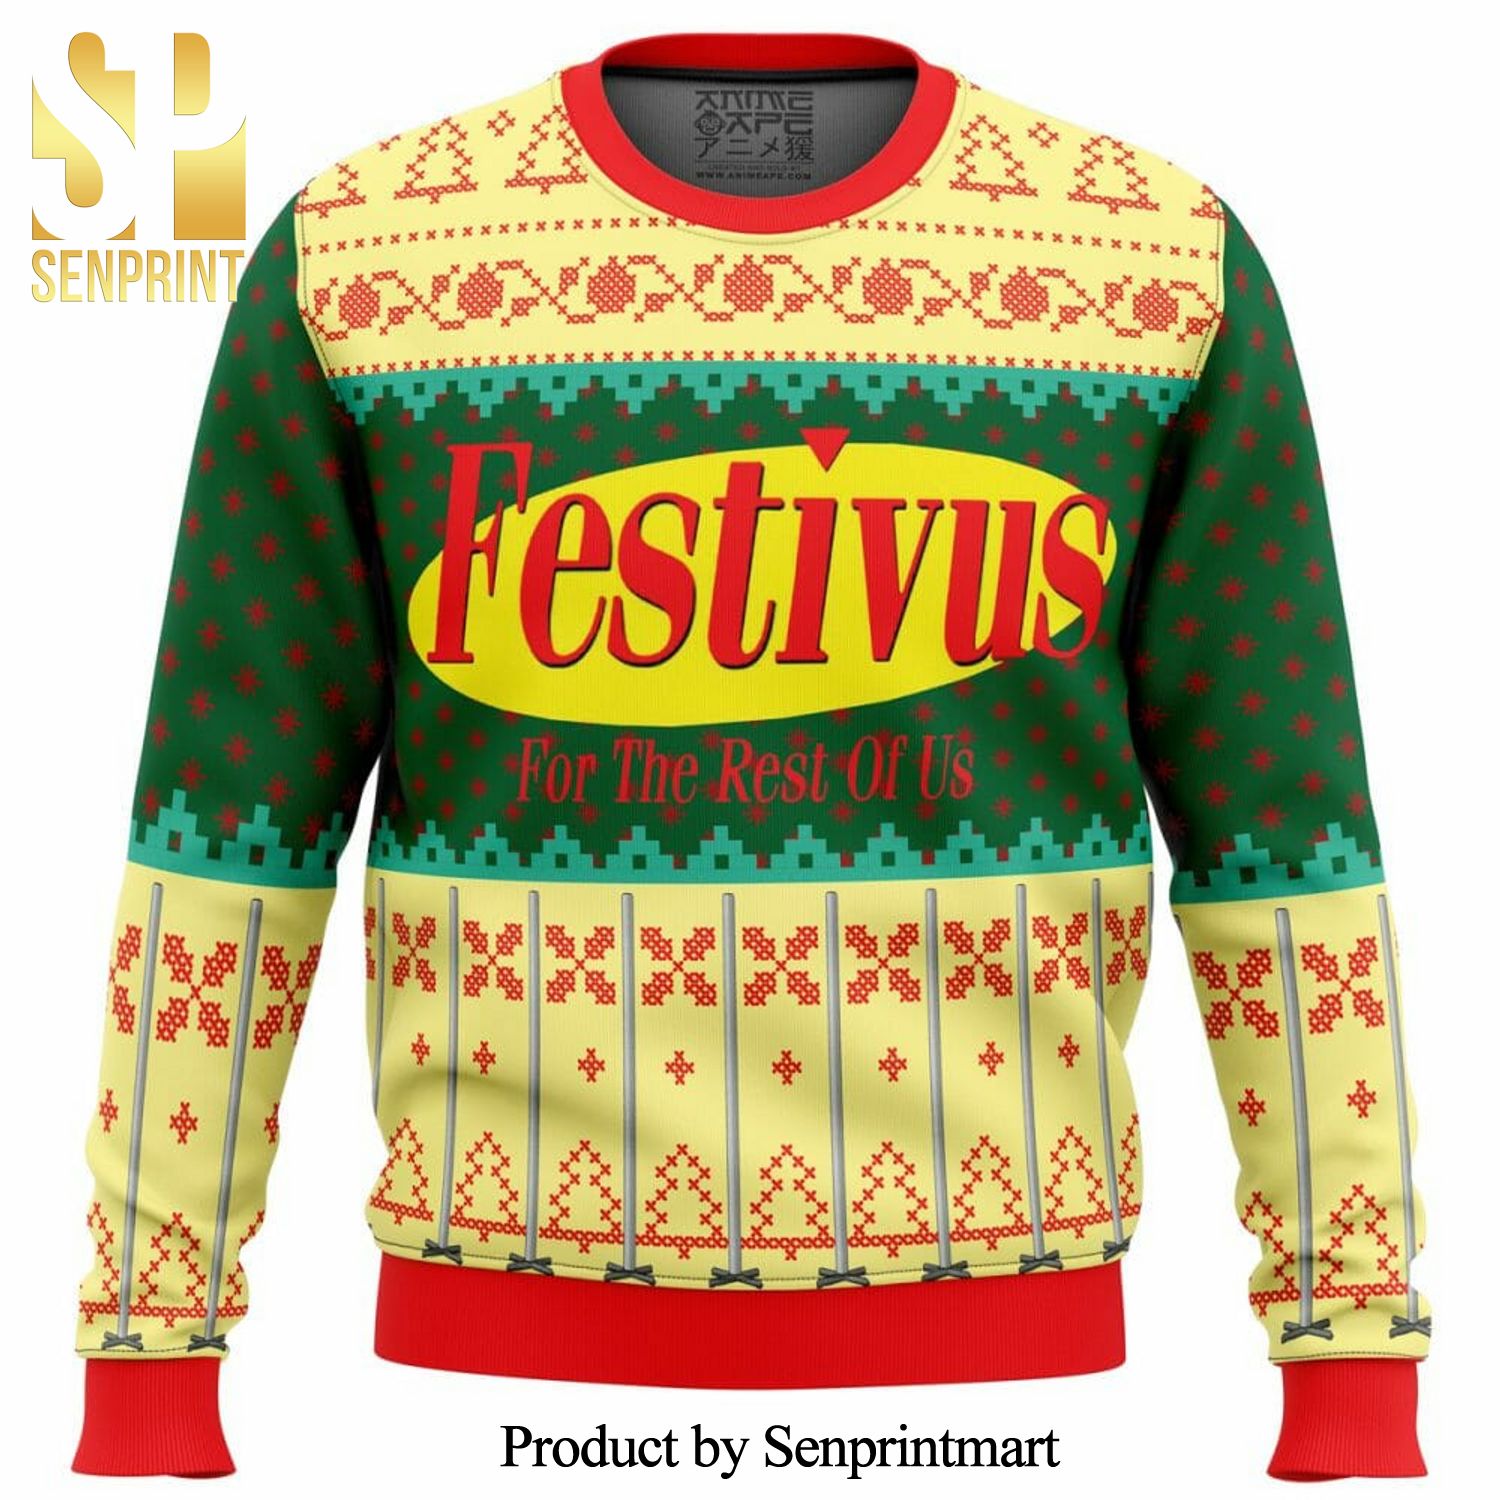 Festivus For The Rest Of Us Knitted Ugly Christmas Sweater